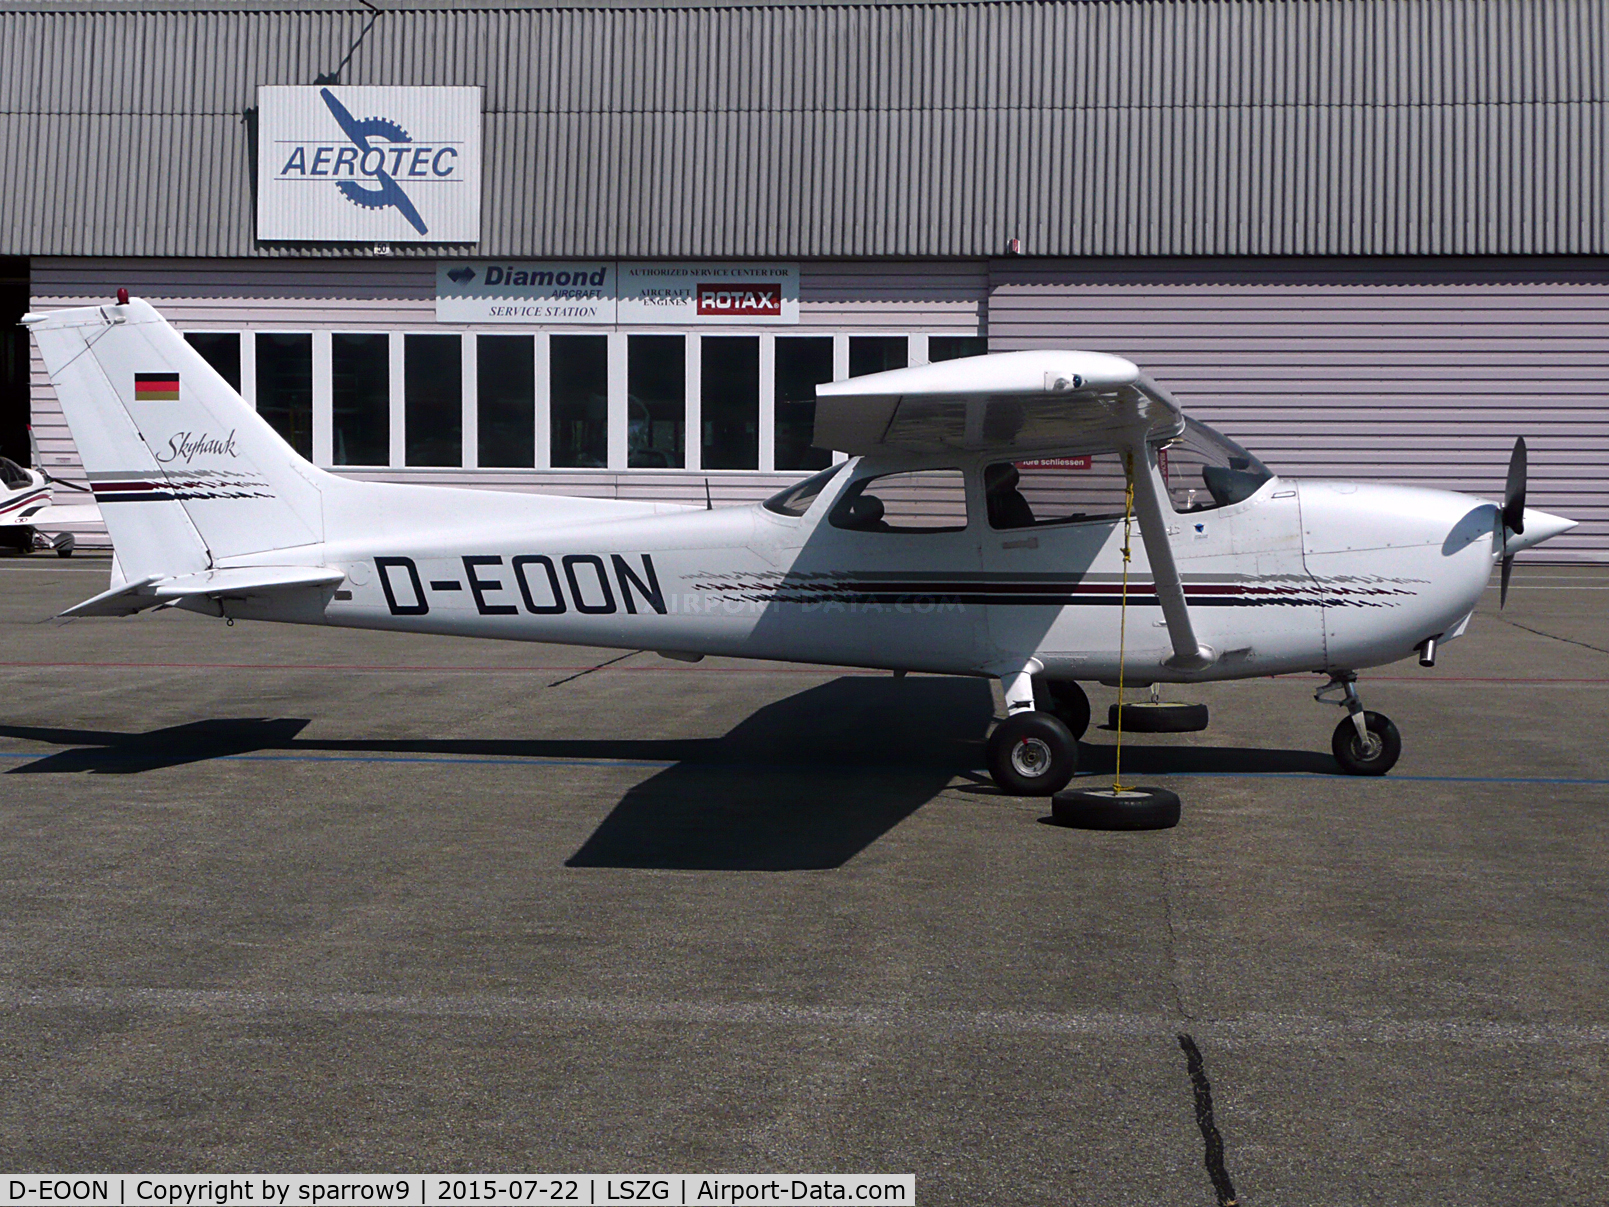 D-EOON, 1997 Cessna 172R Skyhawk C/N 17280173, jus before leaving after some days here